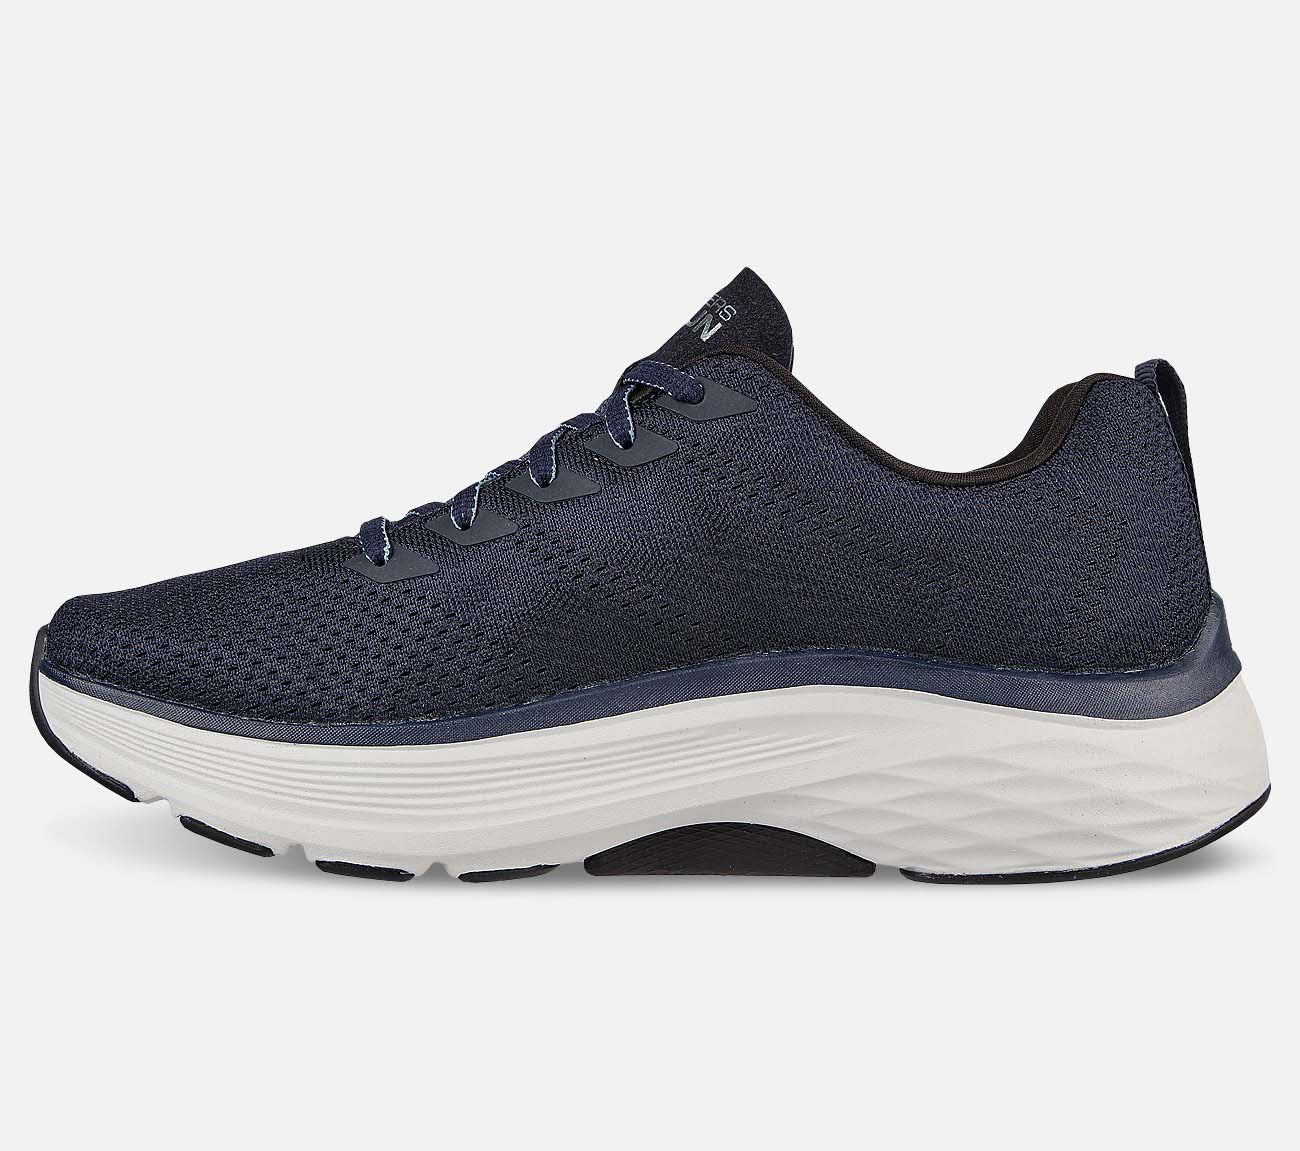 Max Cushioning Arch Fit - Unifier Shoe Skechers